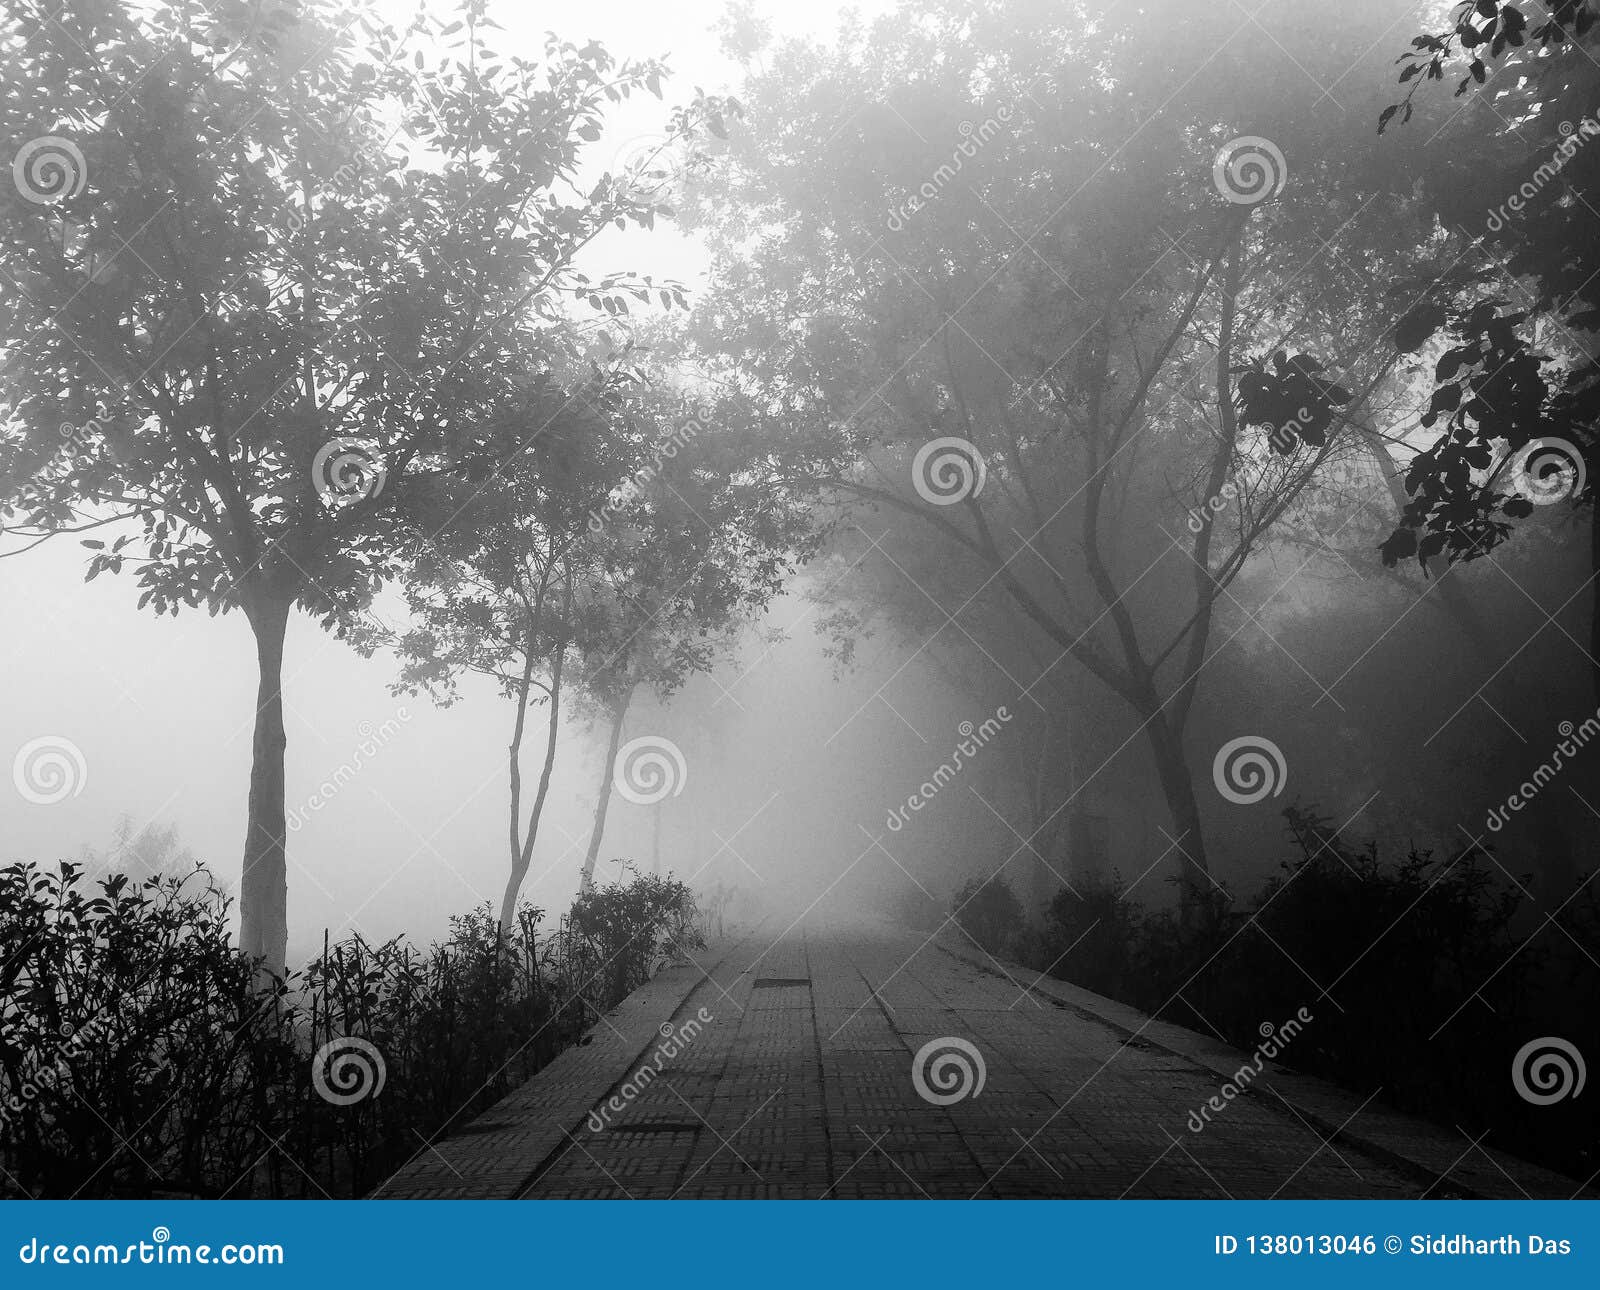 Trees and Branches in Foggy Weather Stock Photo - Image of seesaw